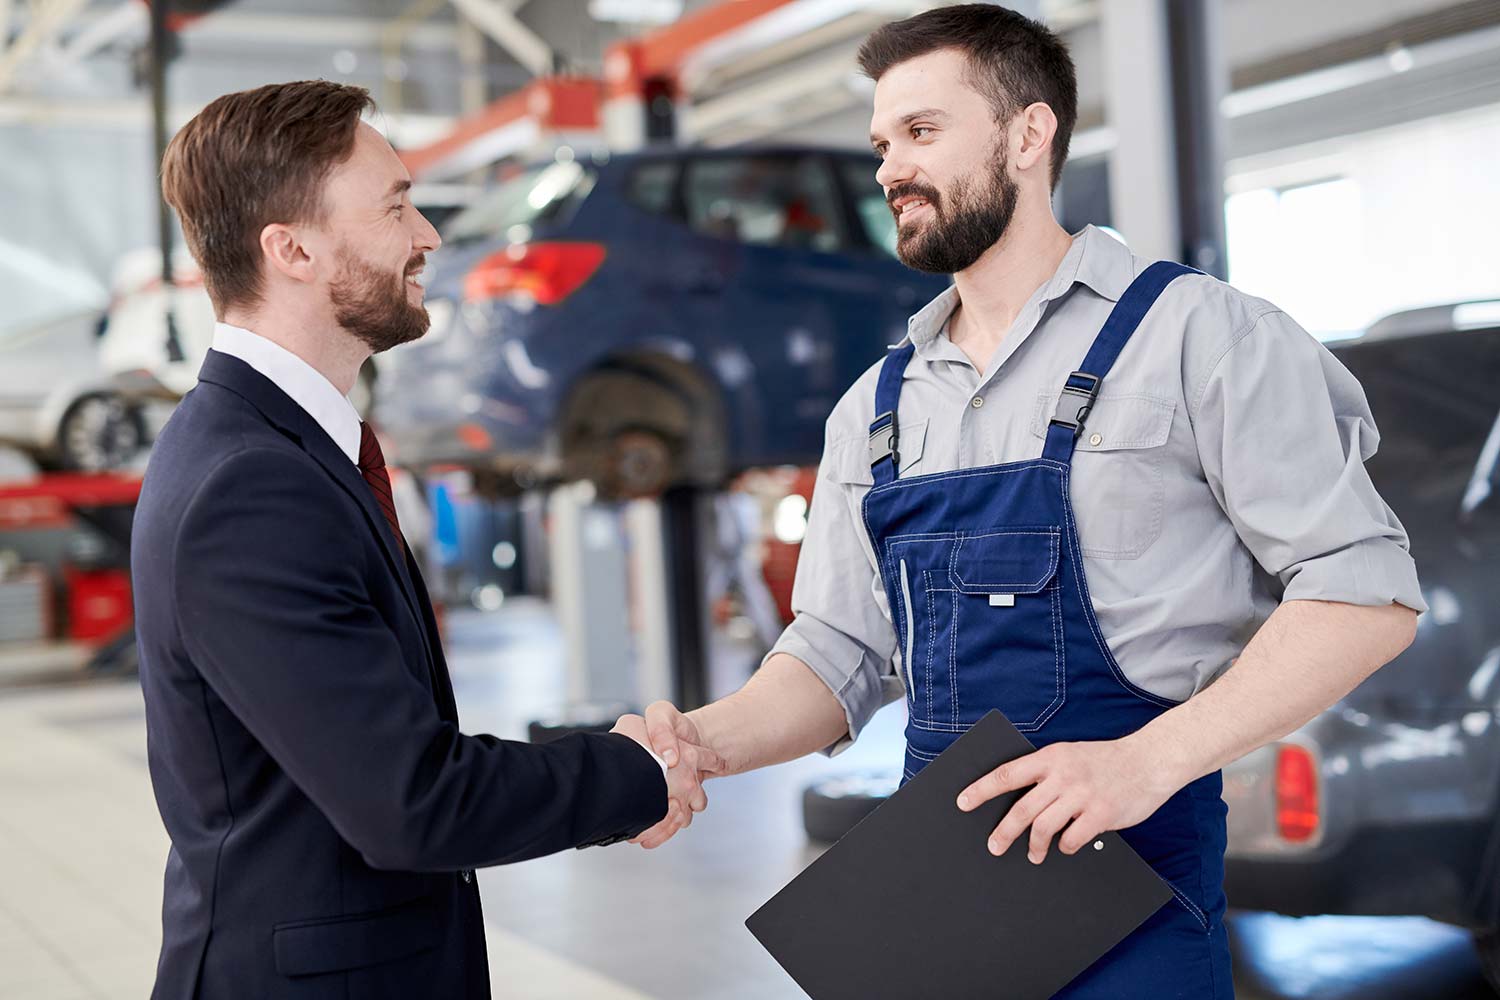 mechanic-shaking-hands-with-businessman-small.jpg